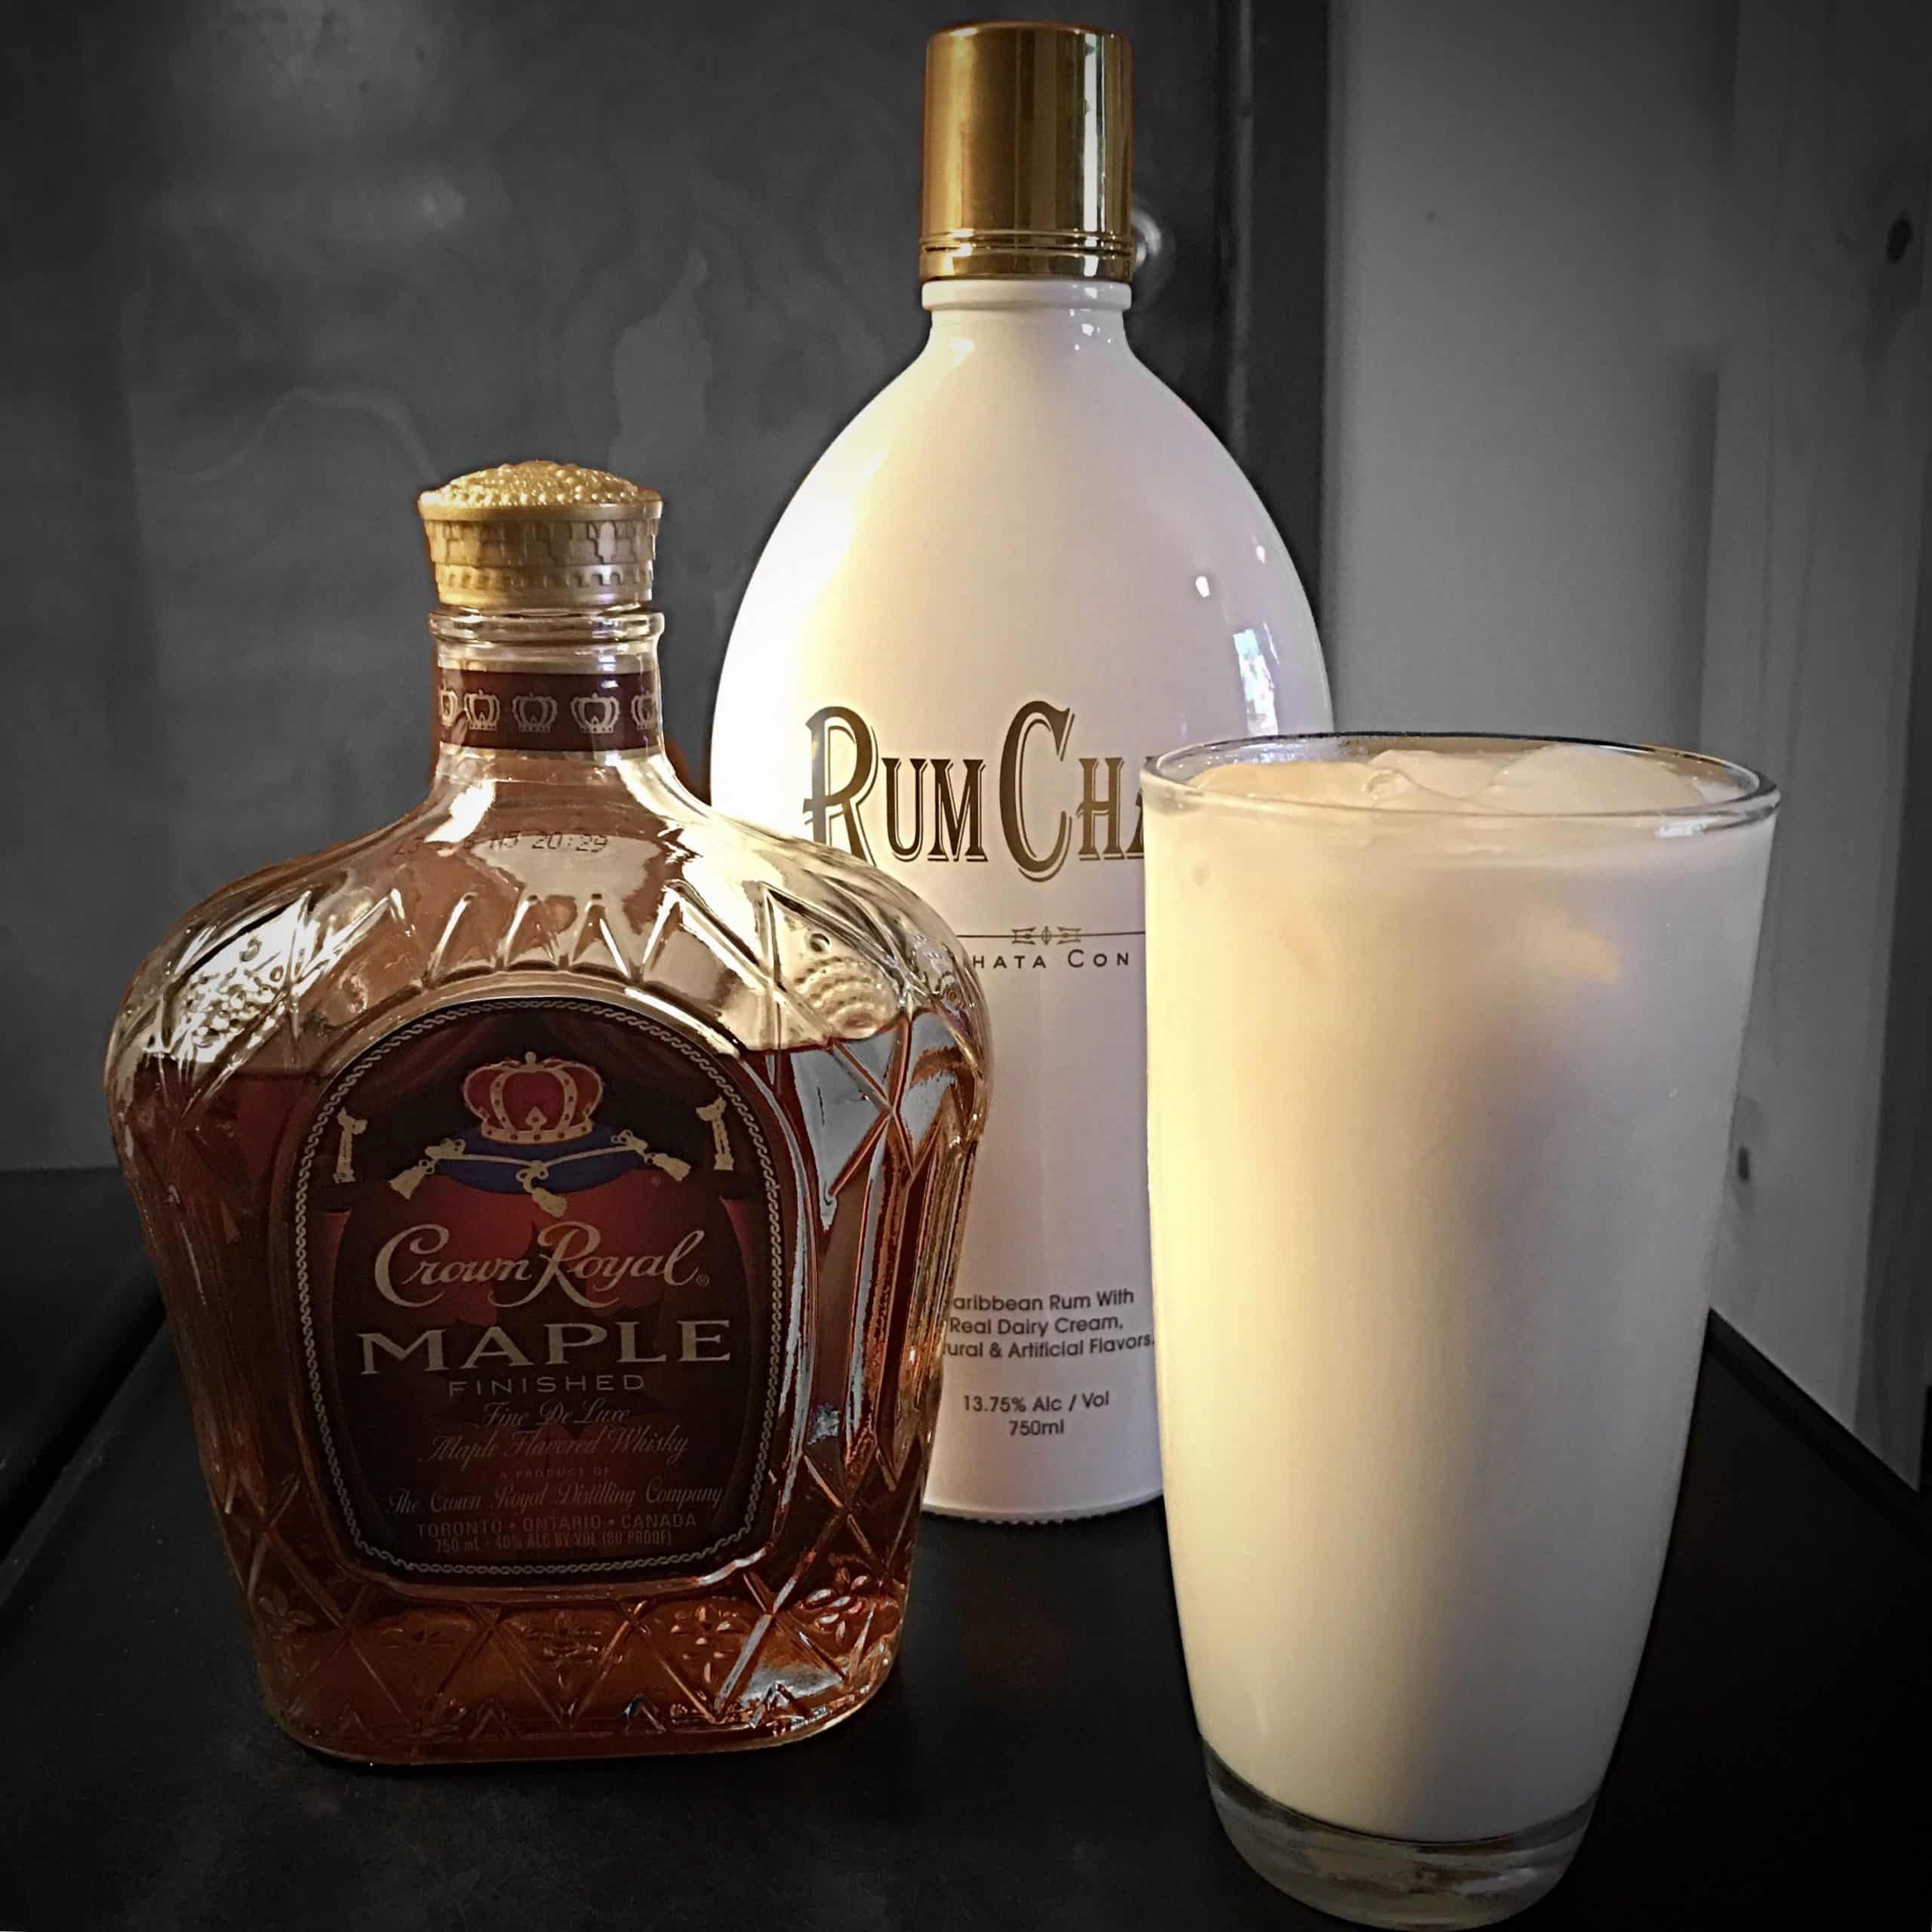 Crown Royal Maple and RumChata is life.